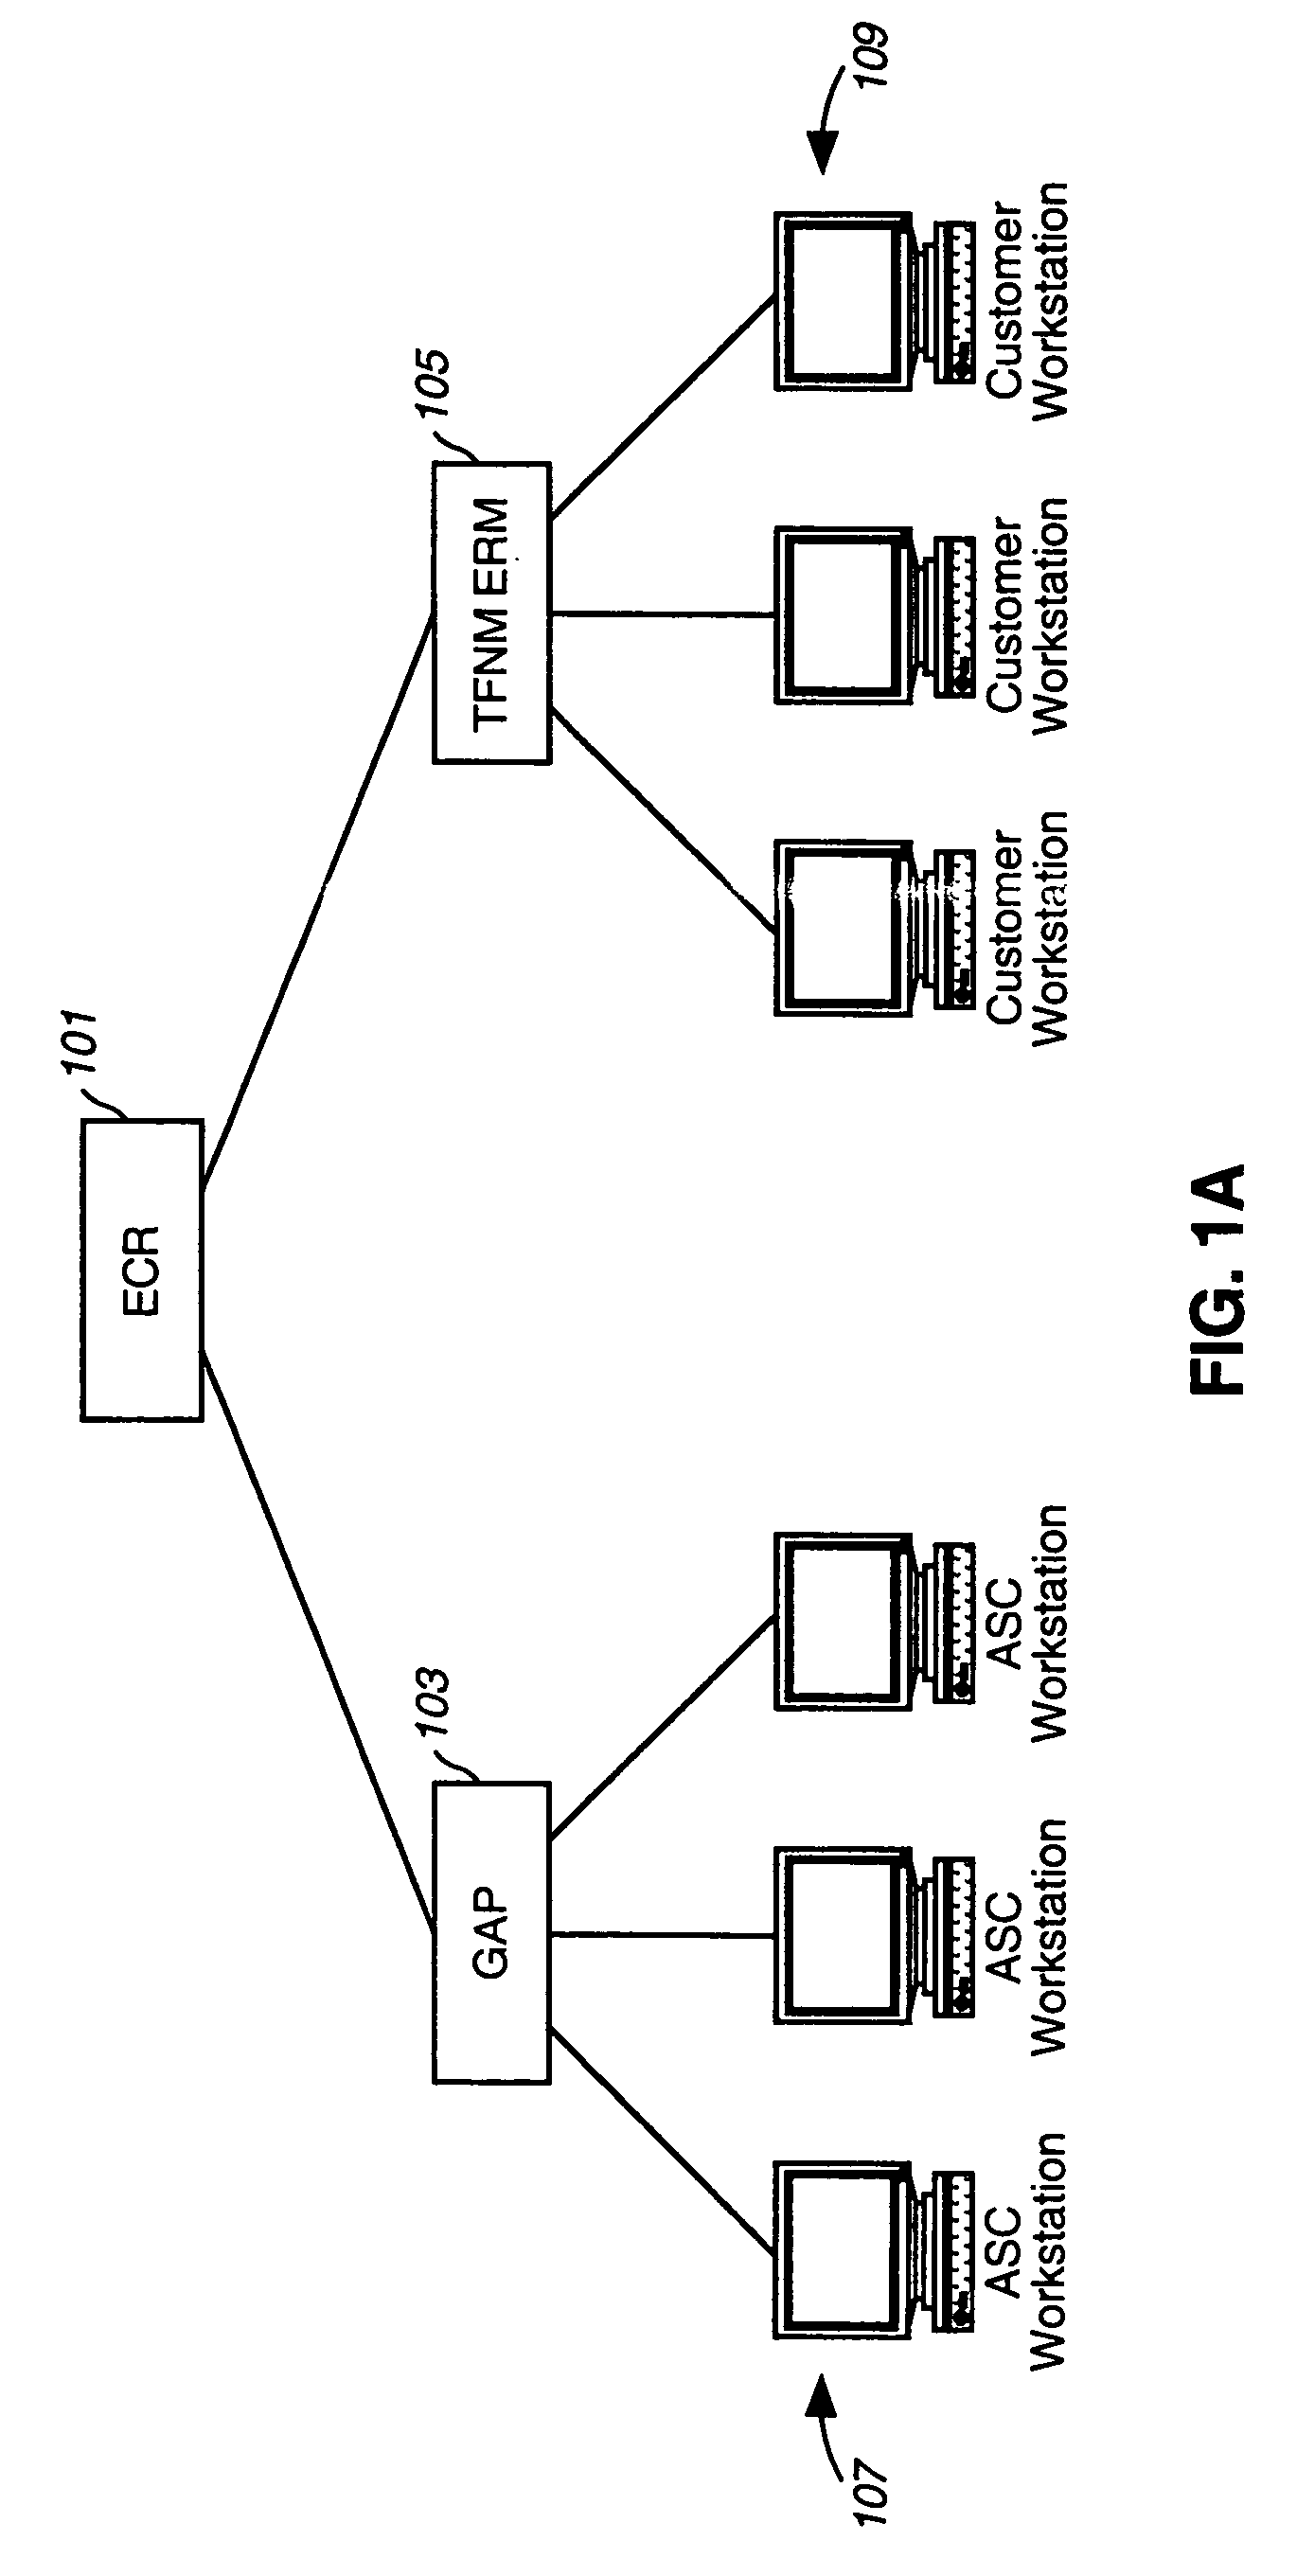 Graphical user interface (GUI) based call application system